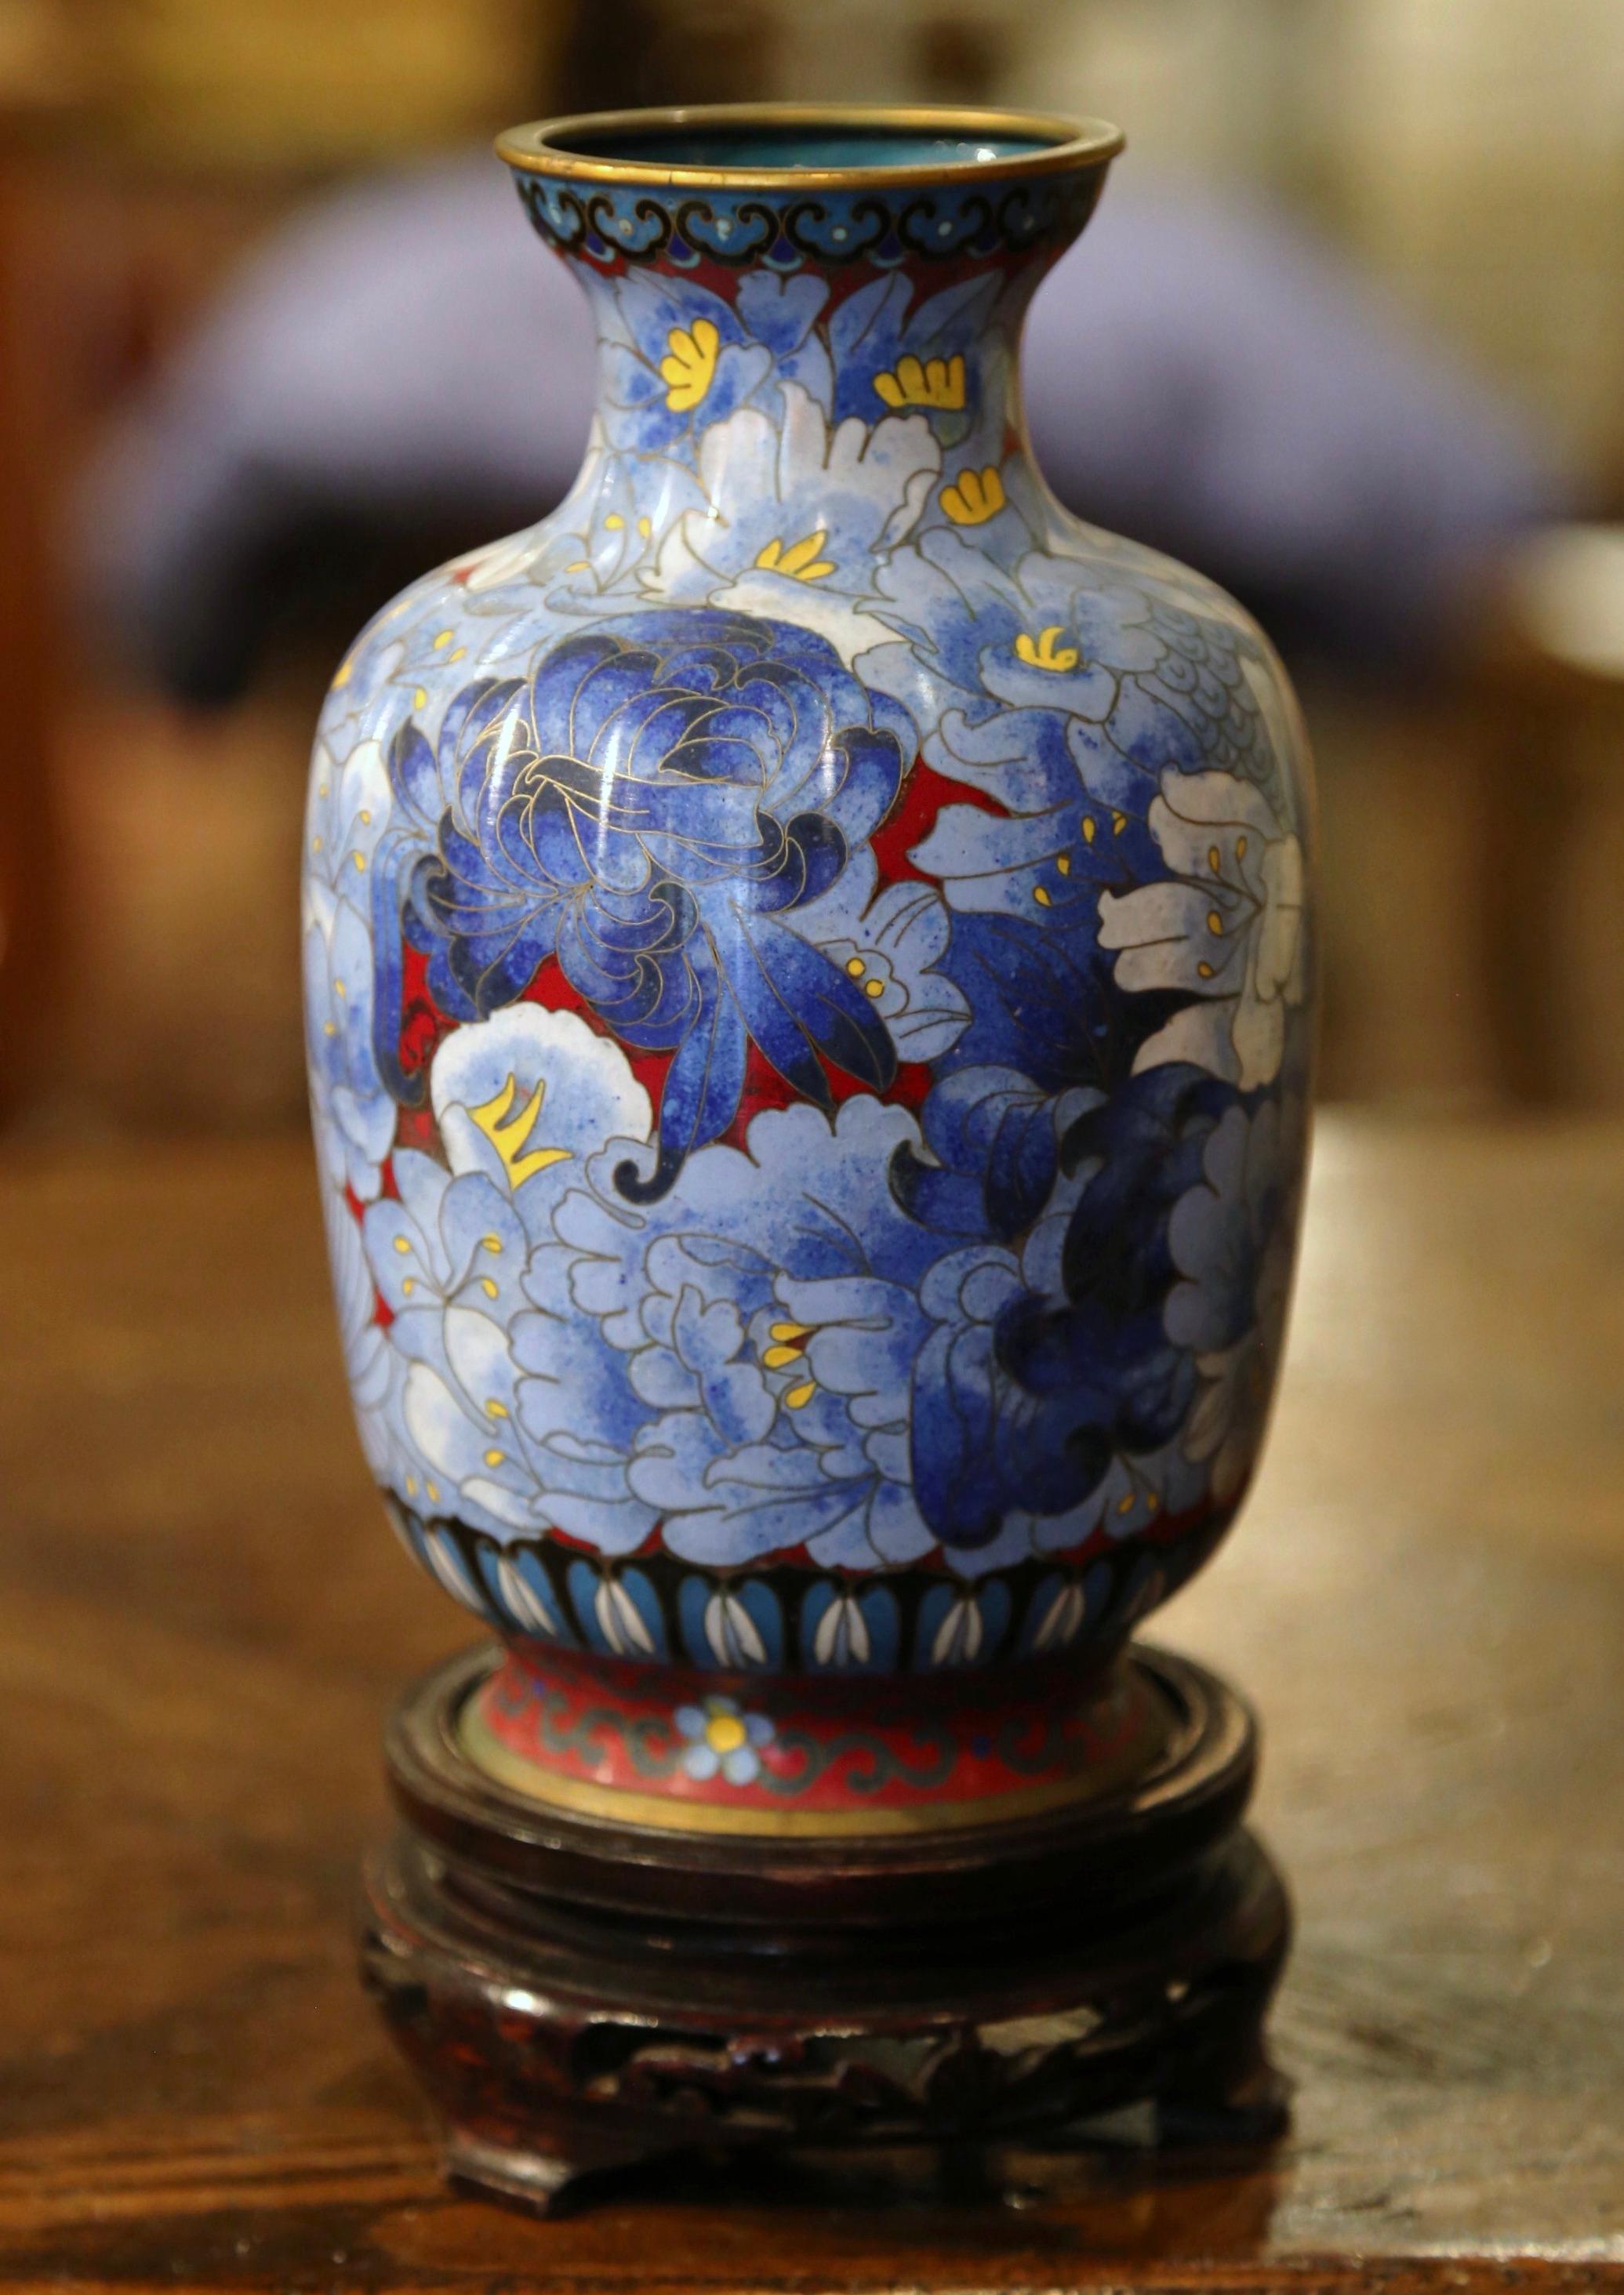 20th Century  Vintage Chinese Cloisonne Champleve Enamel Vase with Floral Motifs